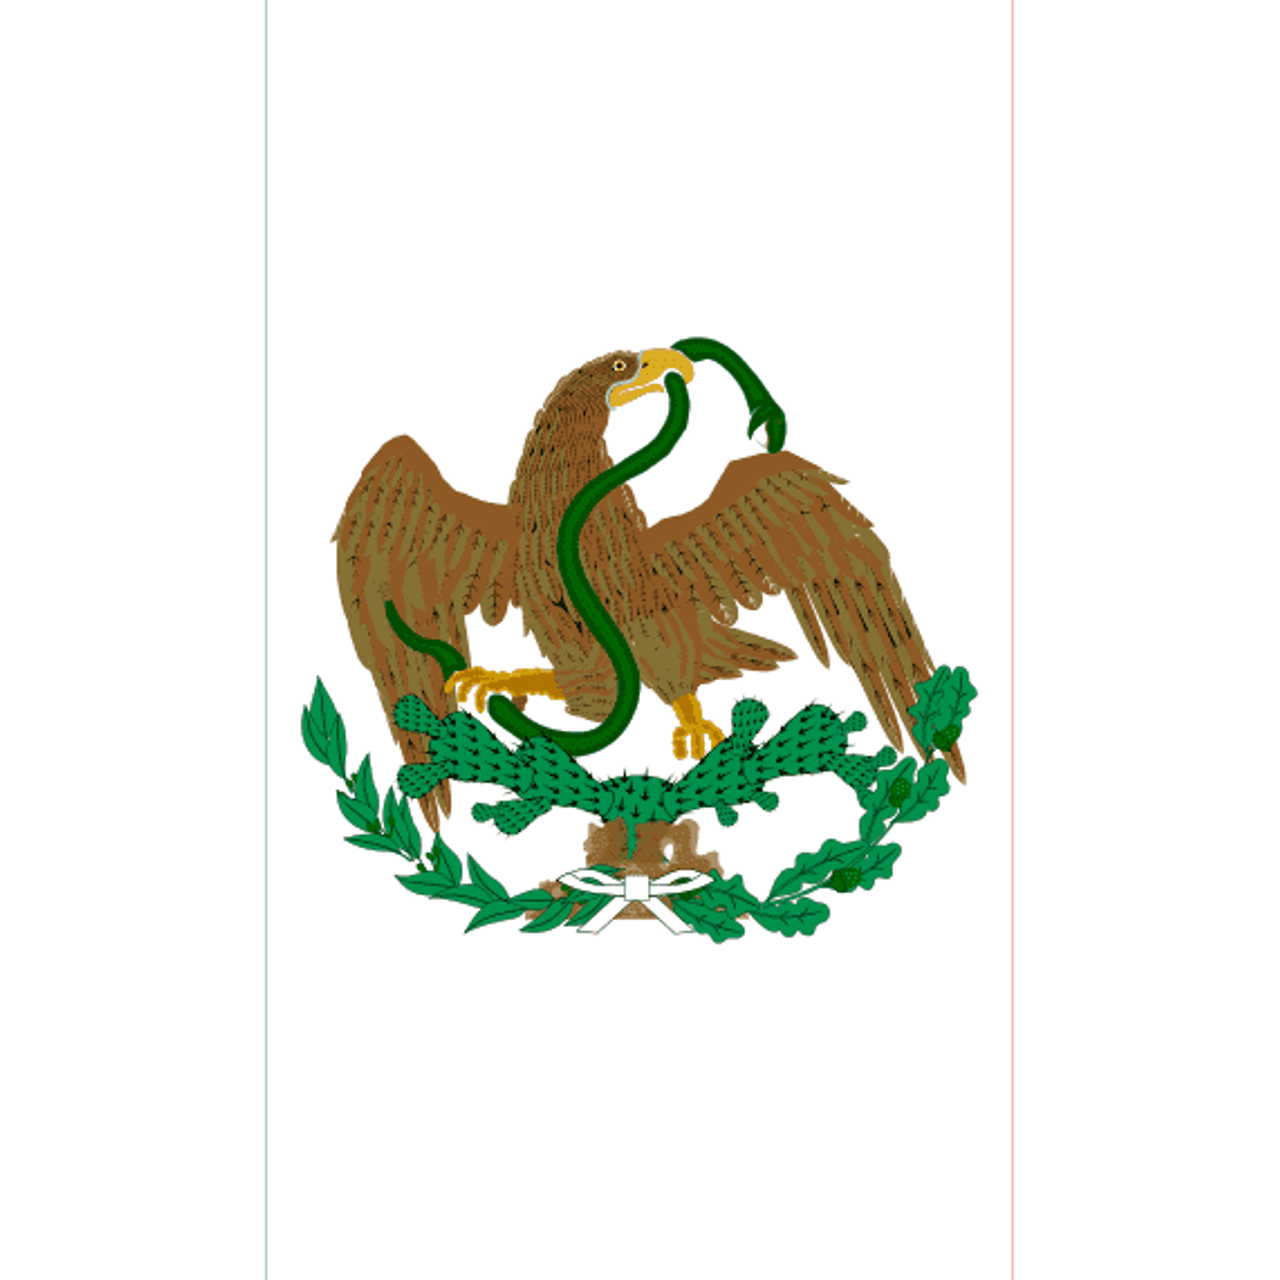 Buy Mexico Flag 3 X 5 ft. for sale, Mexican Flag 3 X 5 ft. for sale